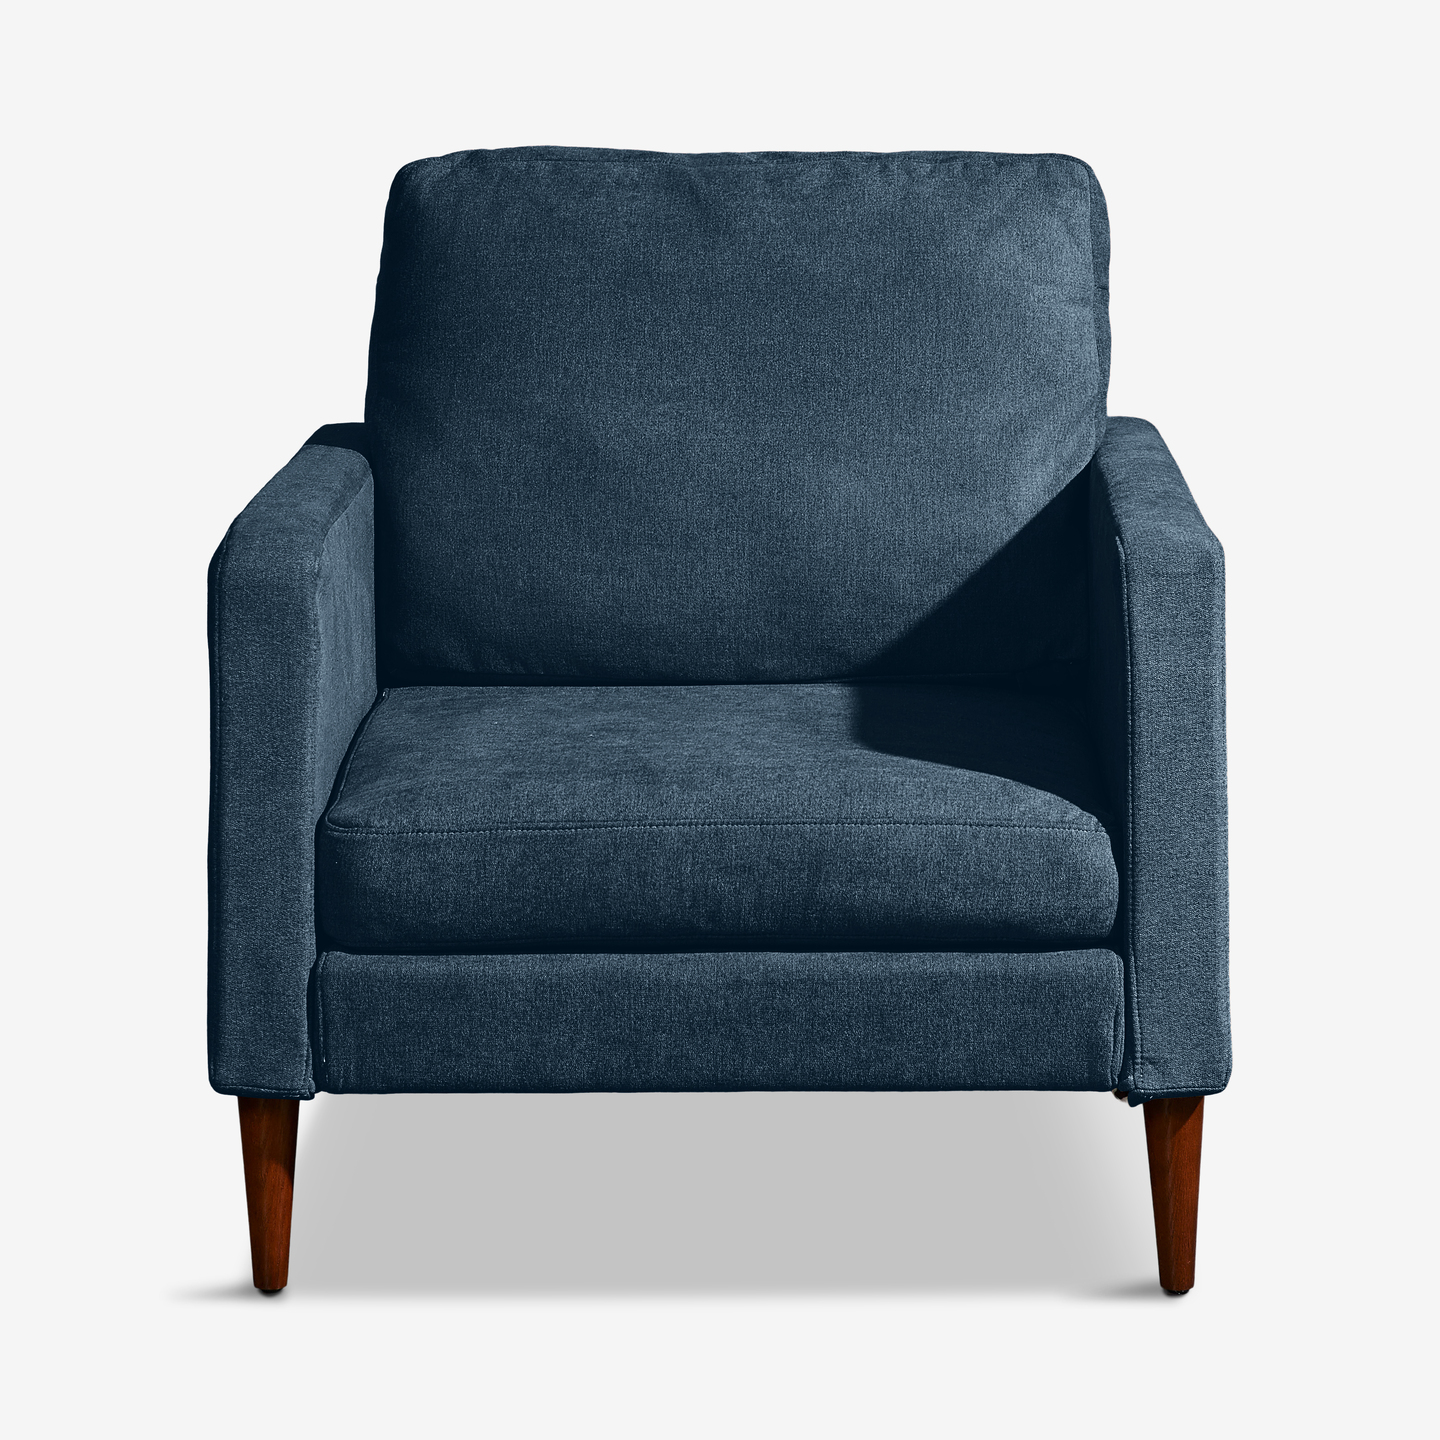 59_Campaign-Chair-Midnight-Navy_Flat-Front (2020)